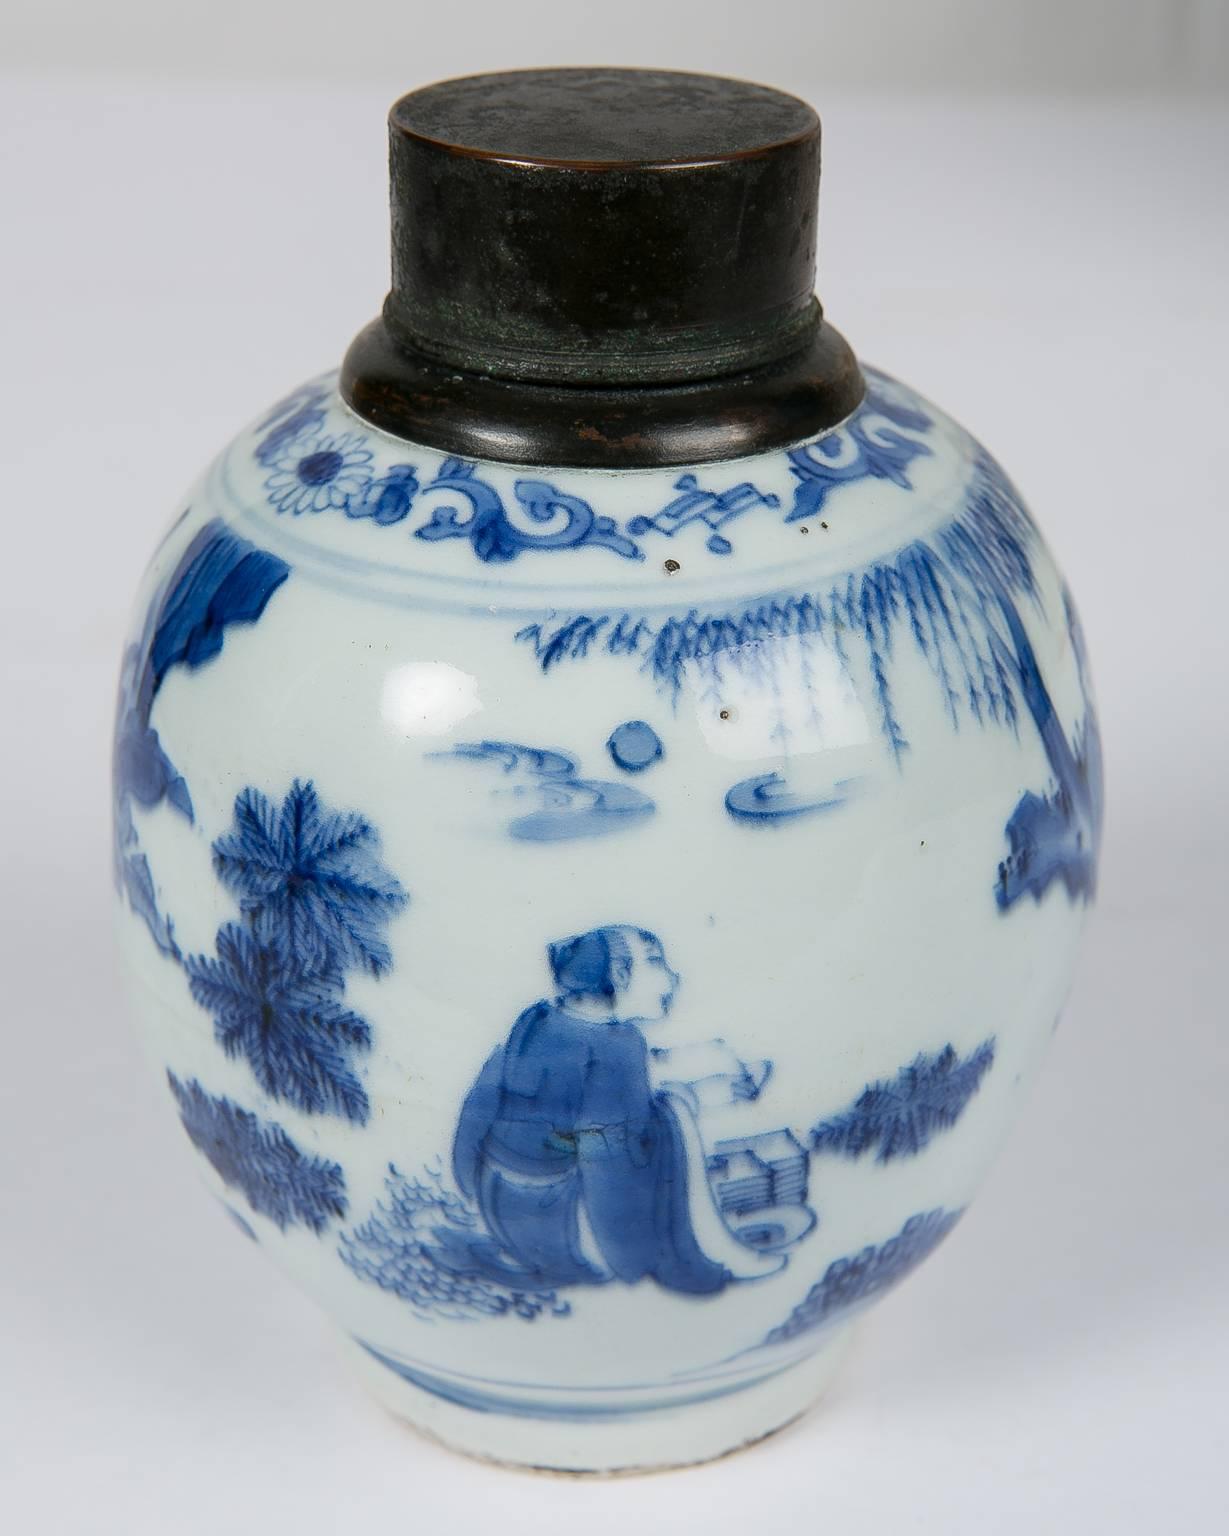 The subject of this Kangxi Blue and White porcelain tea canister is a scholar in relaxation. This kind of scholarly motif has been a time-honored subject in Chinese decorative arts. As seen on this porcelain, the decoration features a boy attendant